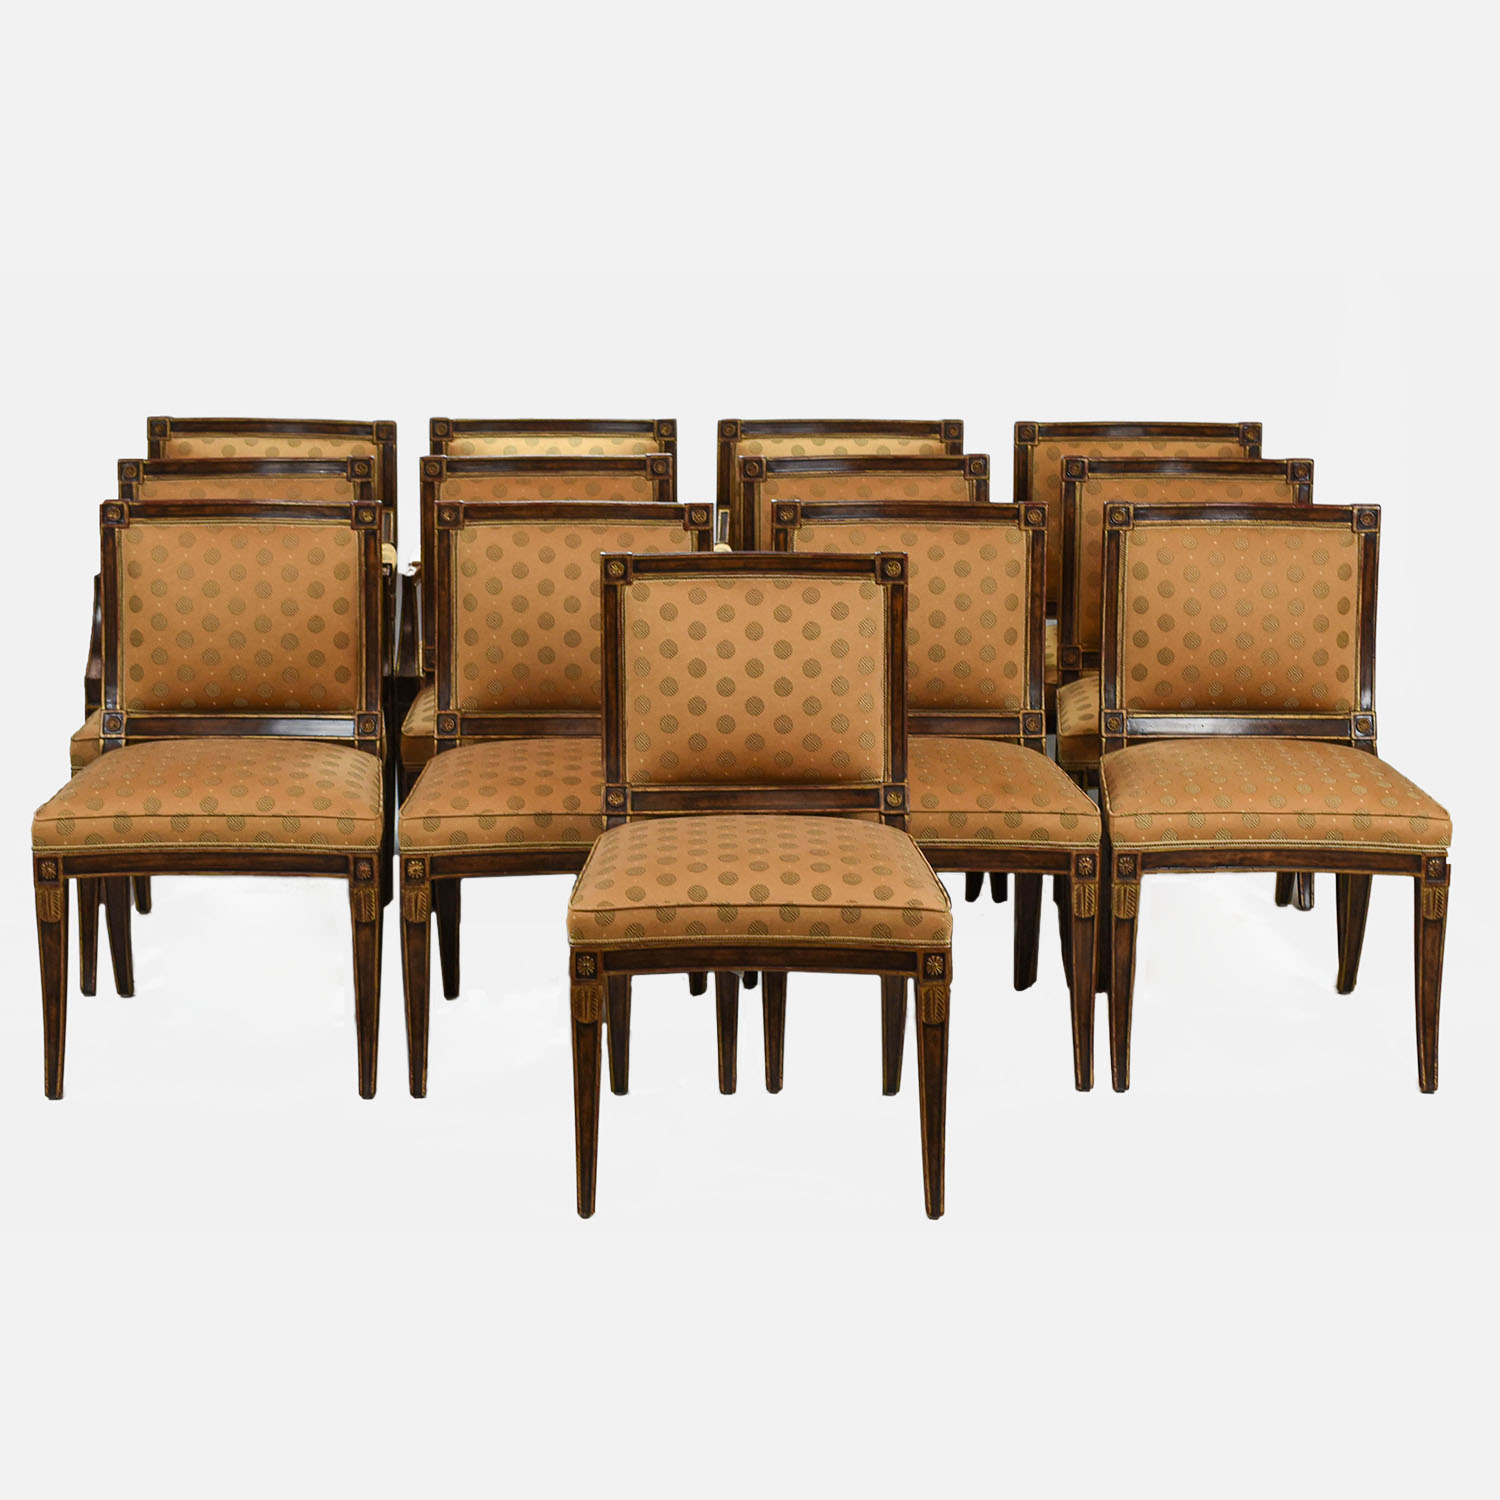 13 Minton Spidell French Modern Dining Room Chairs